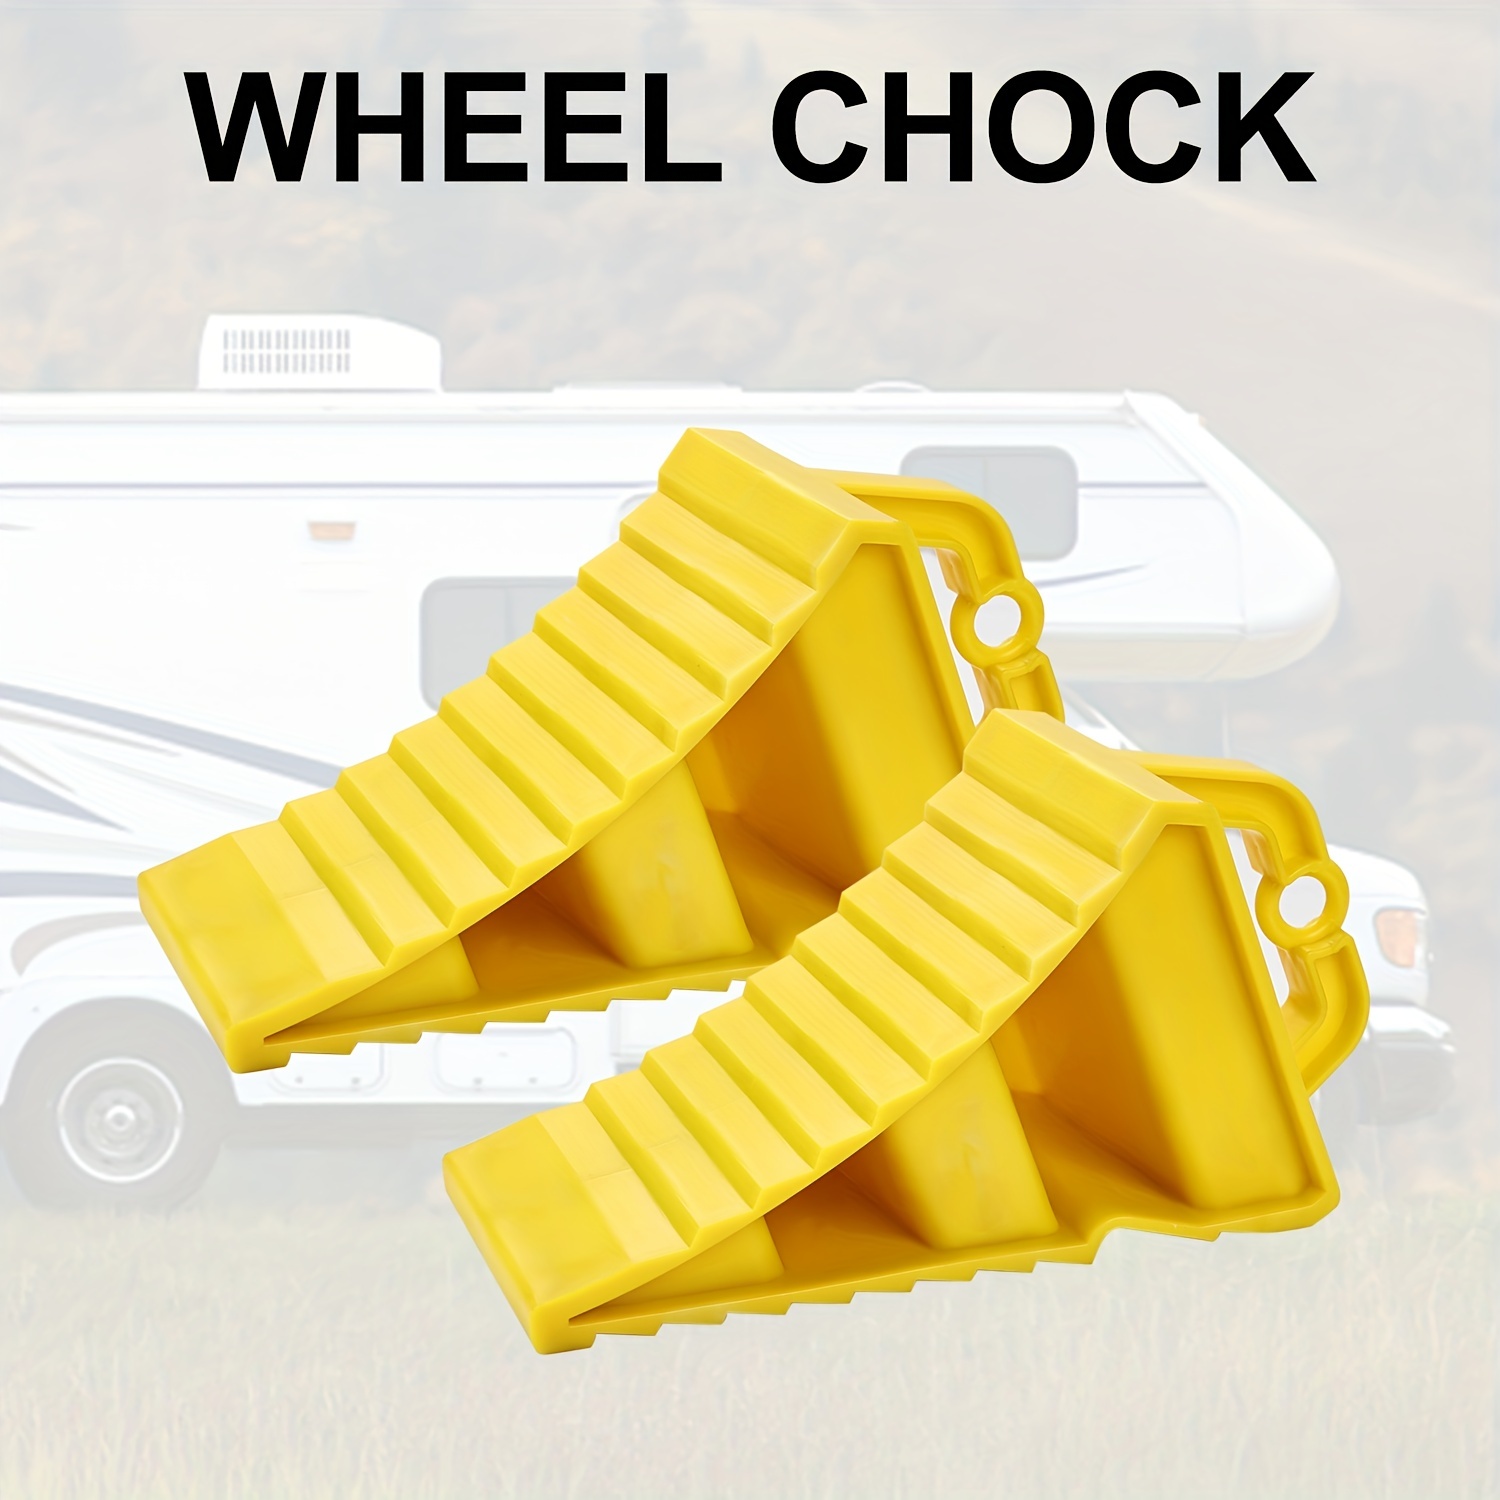 

Heavy Duty Non-slip Rv Wheel Chocks With Handles - Easy To Carry For Travel Trailers, Campers, Cars & Trucks